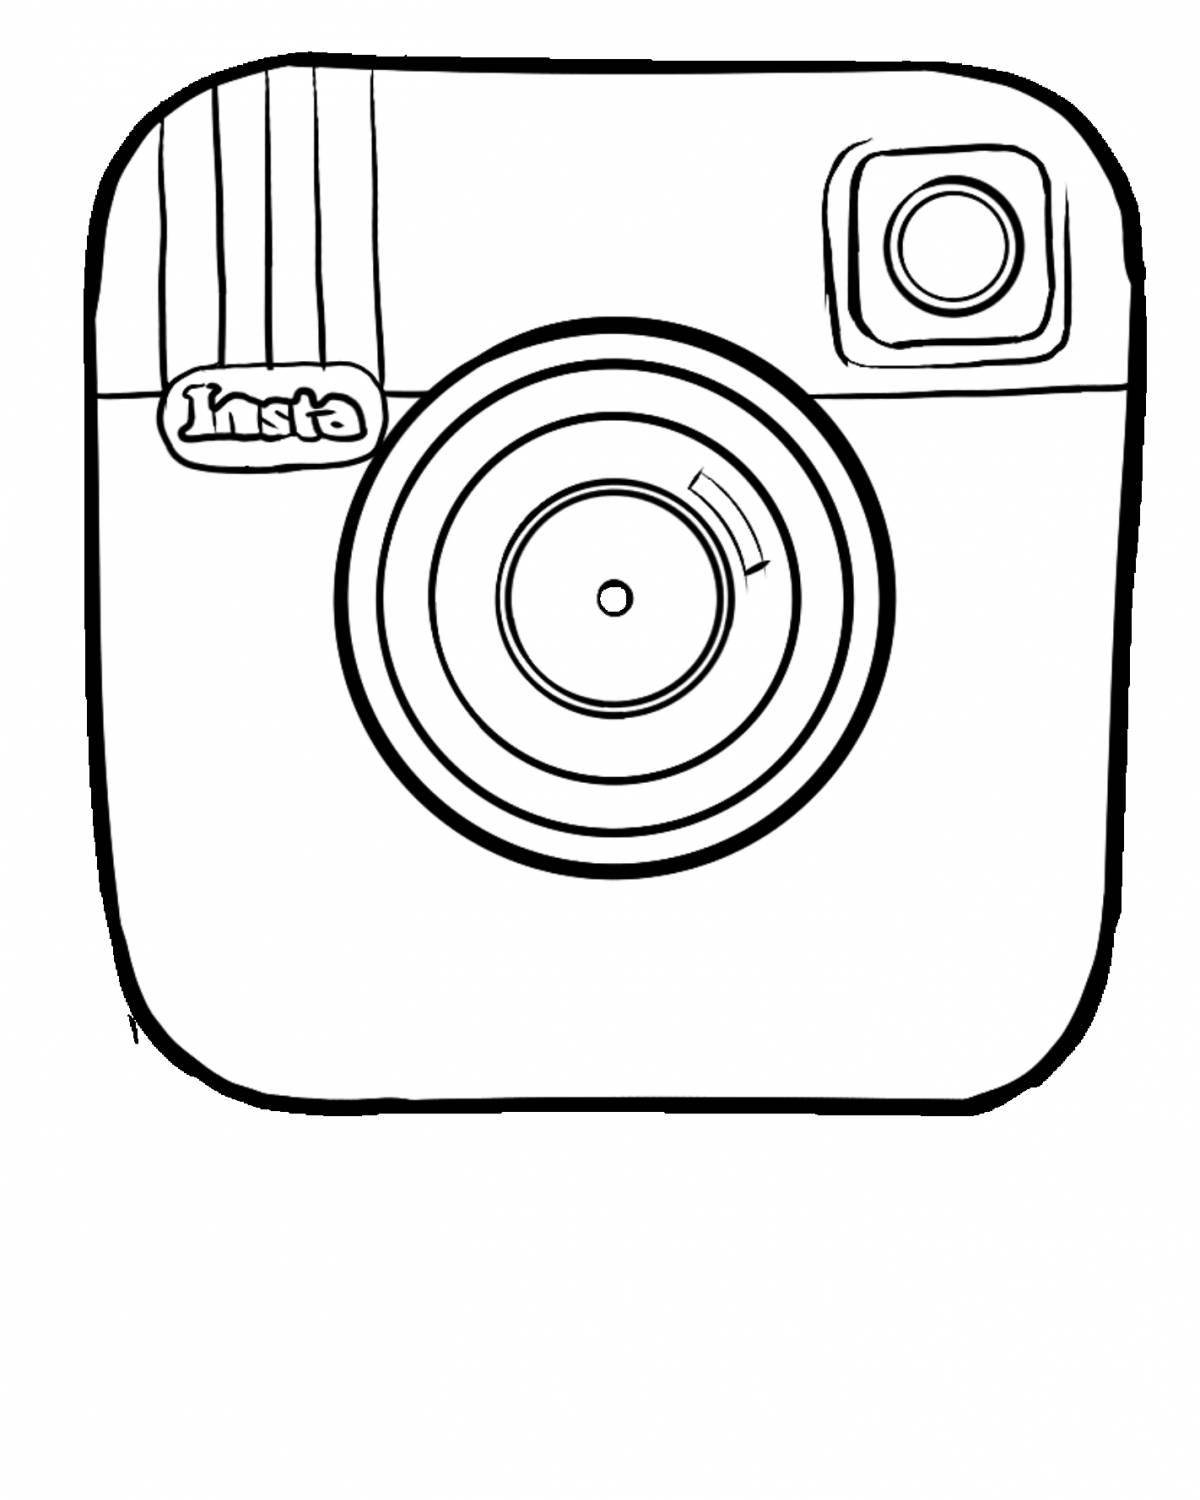 Impressive coloring book for black and white photography for android